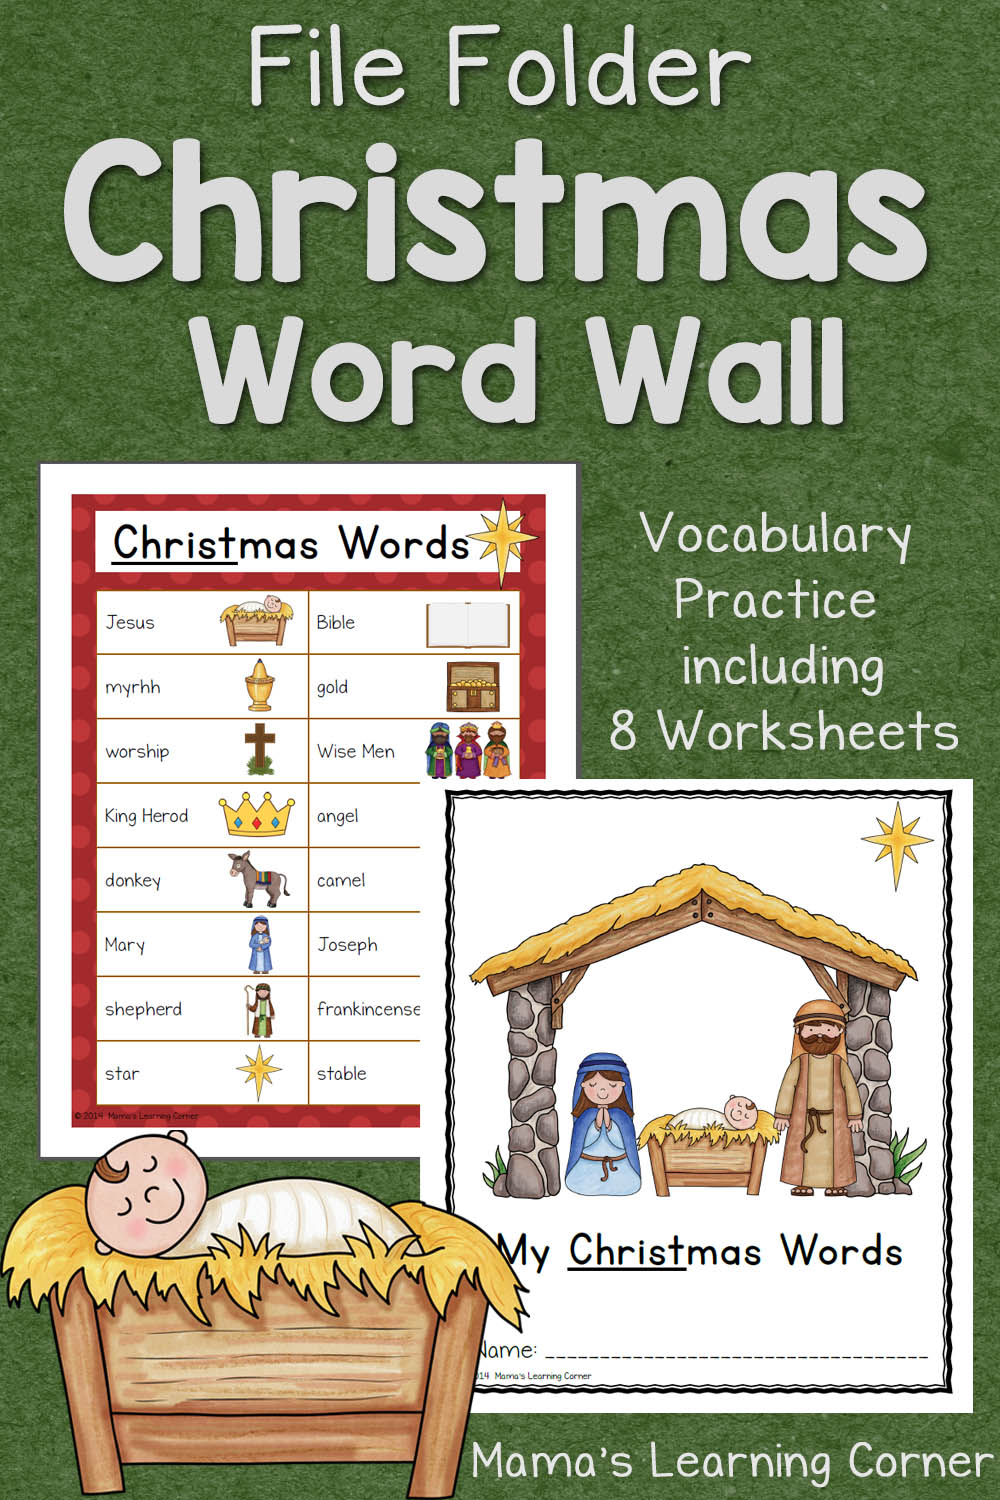 Christmas File Folder Word Wall - includes vocabulary list focusing on the Birth of Christ